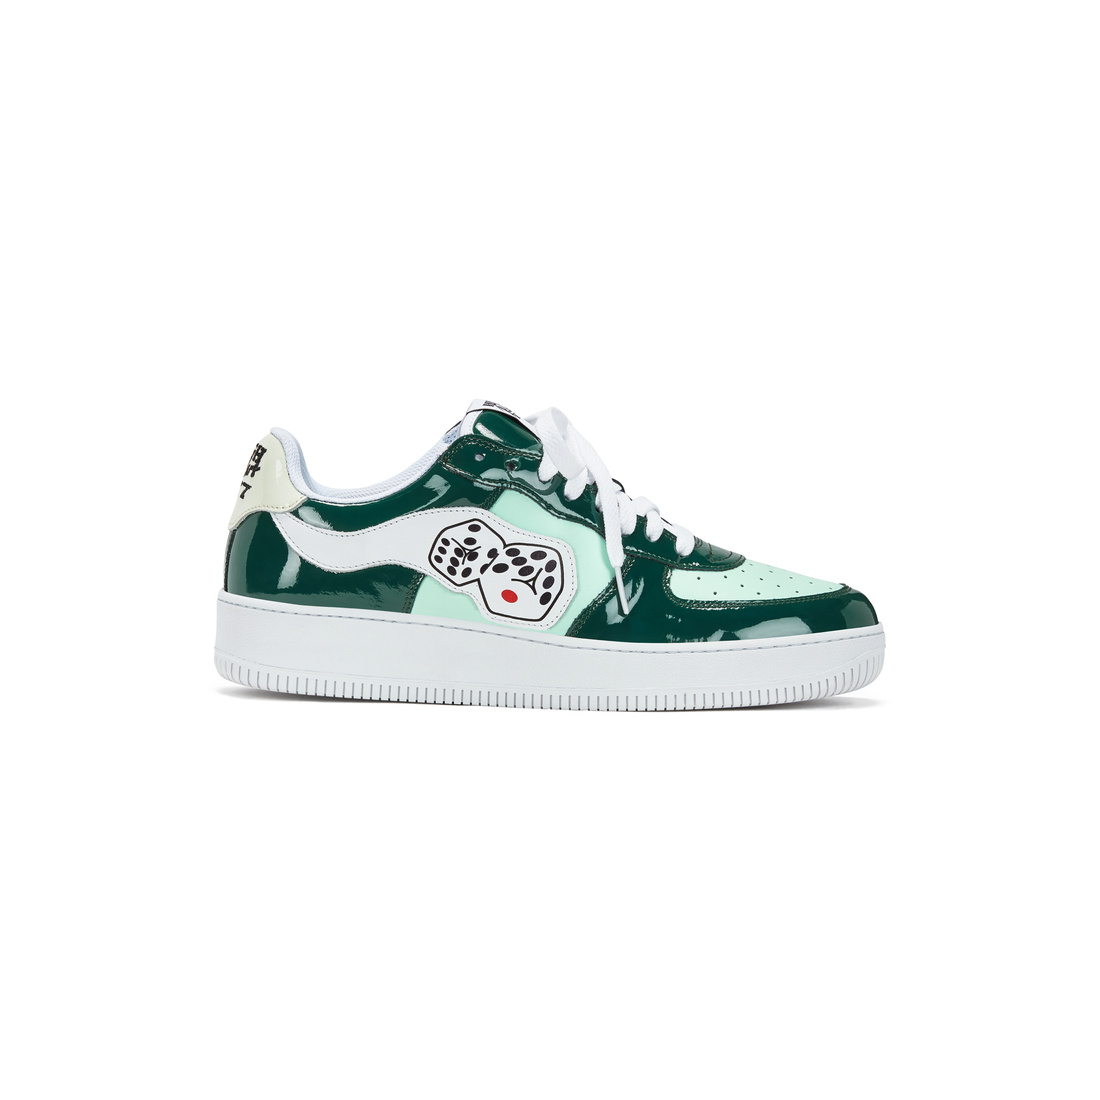 A green and white colored shoe